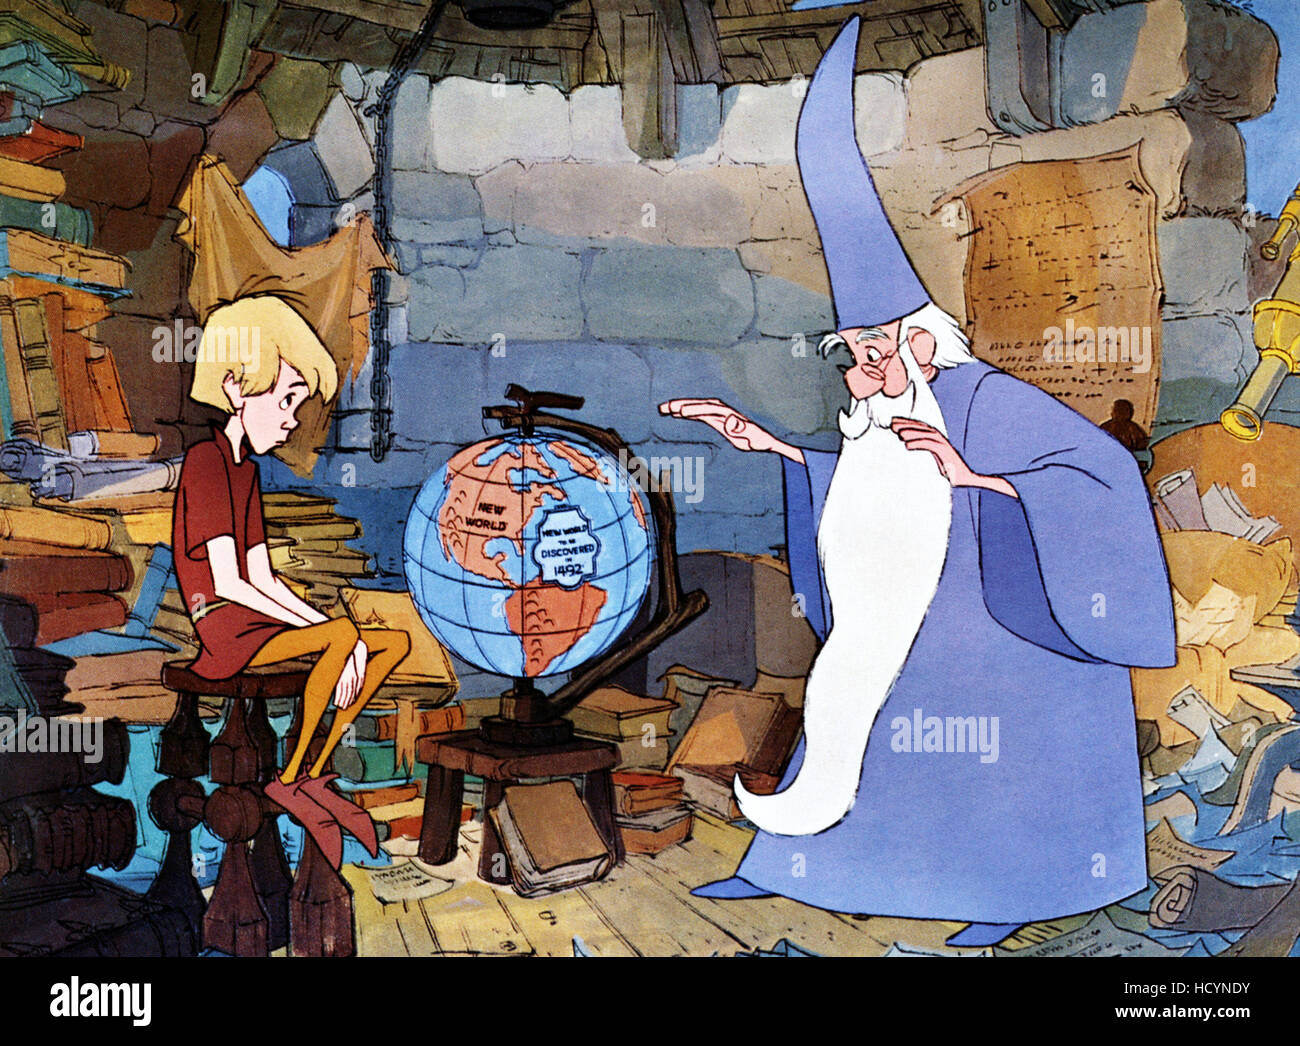 THE SWORD IN THE STONE, from left: Wart (aka King Arthur), Merlin, 1963.  ©Walt Disney Pictures/courtesy Everett Collection Stock Photo - Alamy